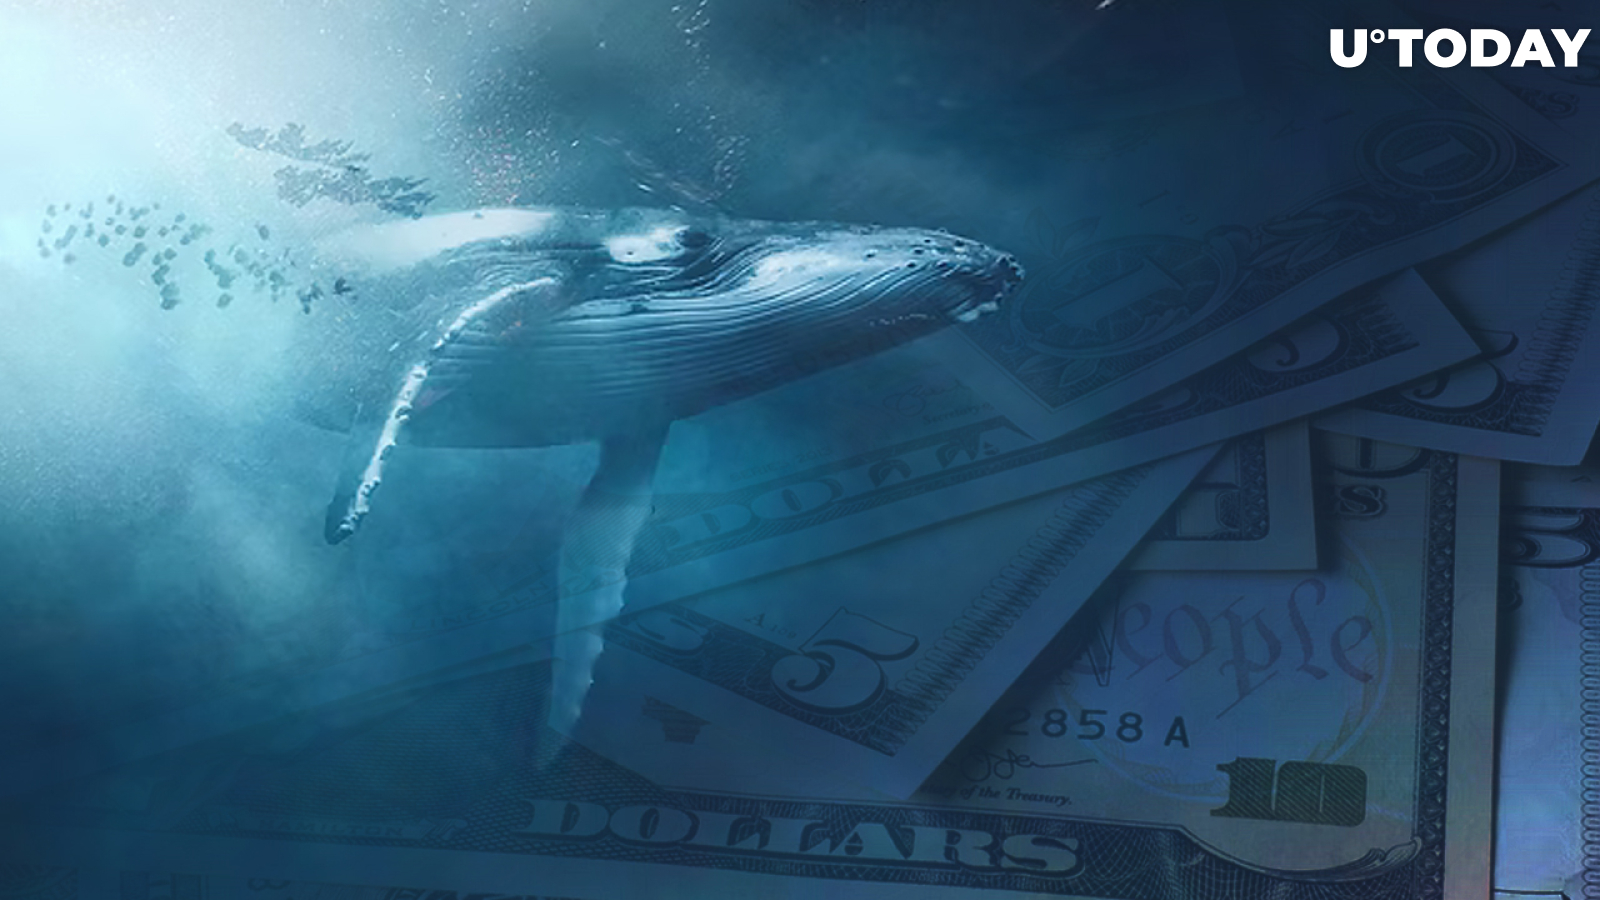 Largest Whale Inflow of $116,000 BTC Spotted; What Might It Mean for Price?